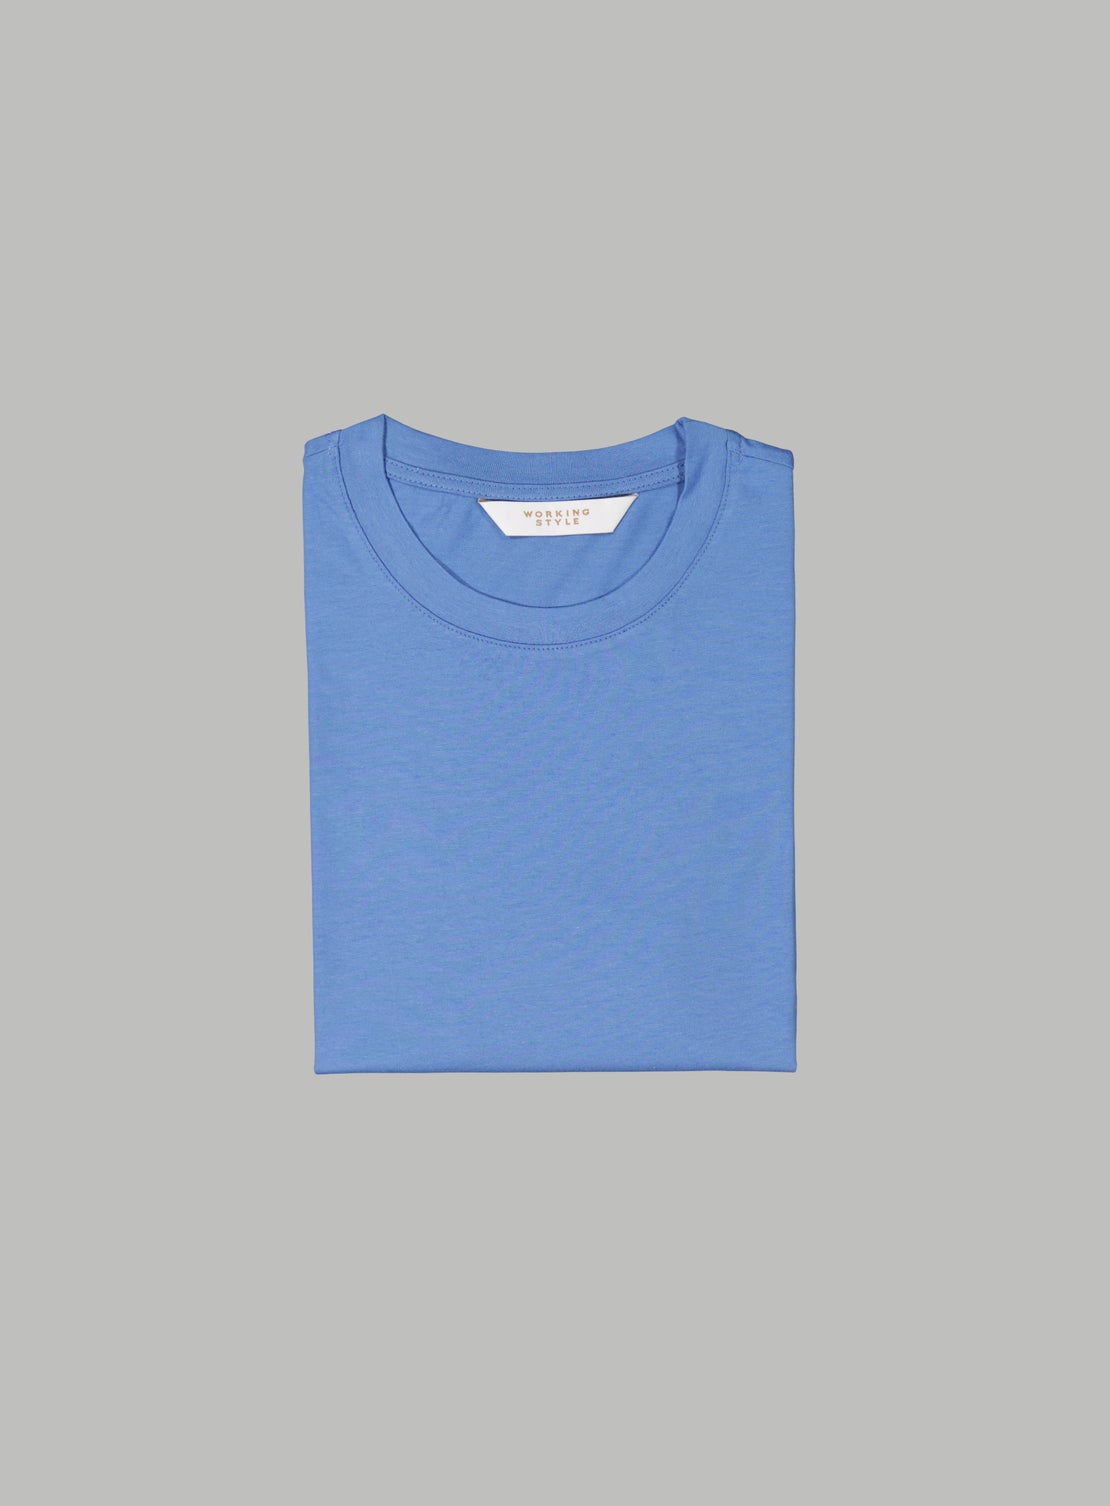 Benny Light Blue T-Shirt - Product - Working Style